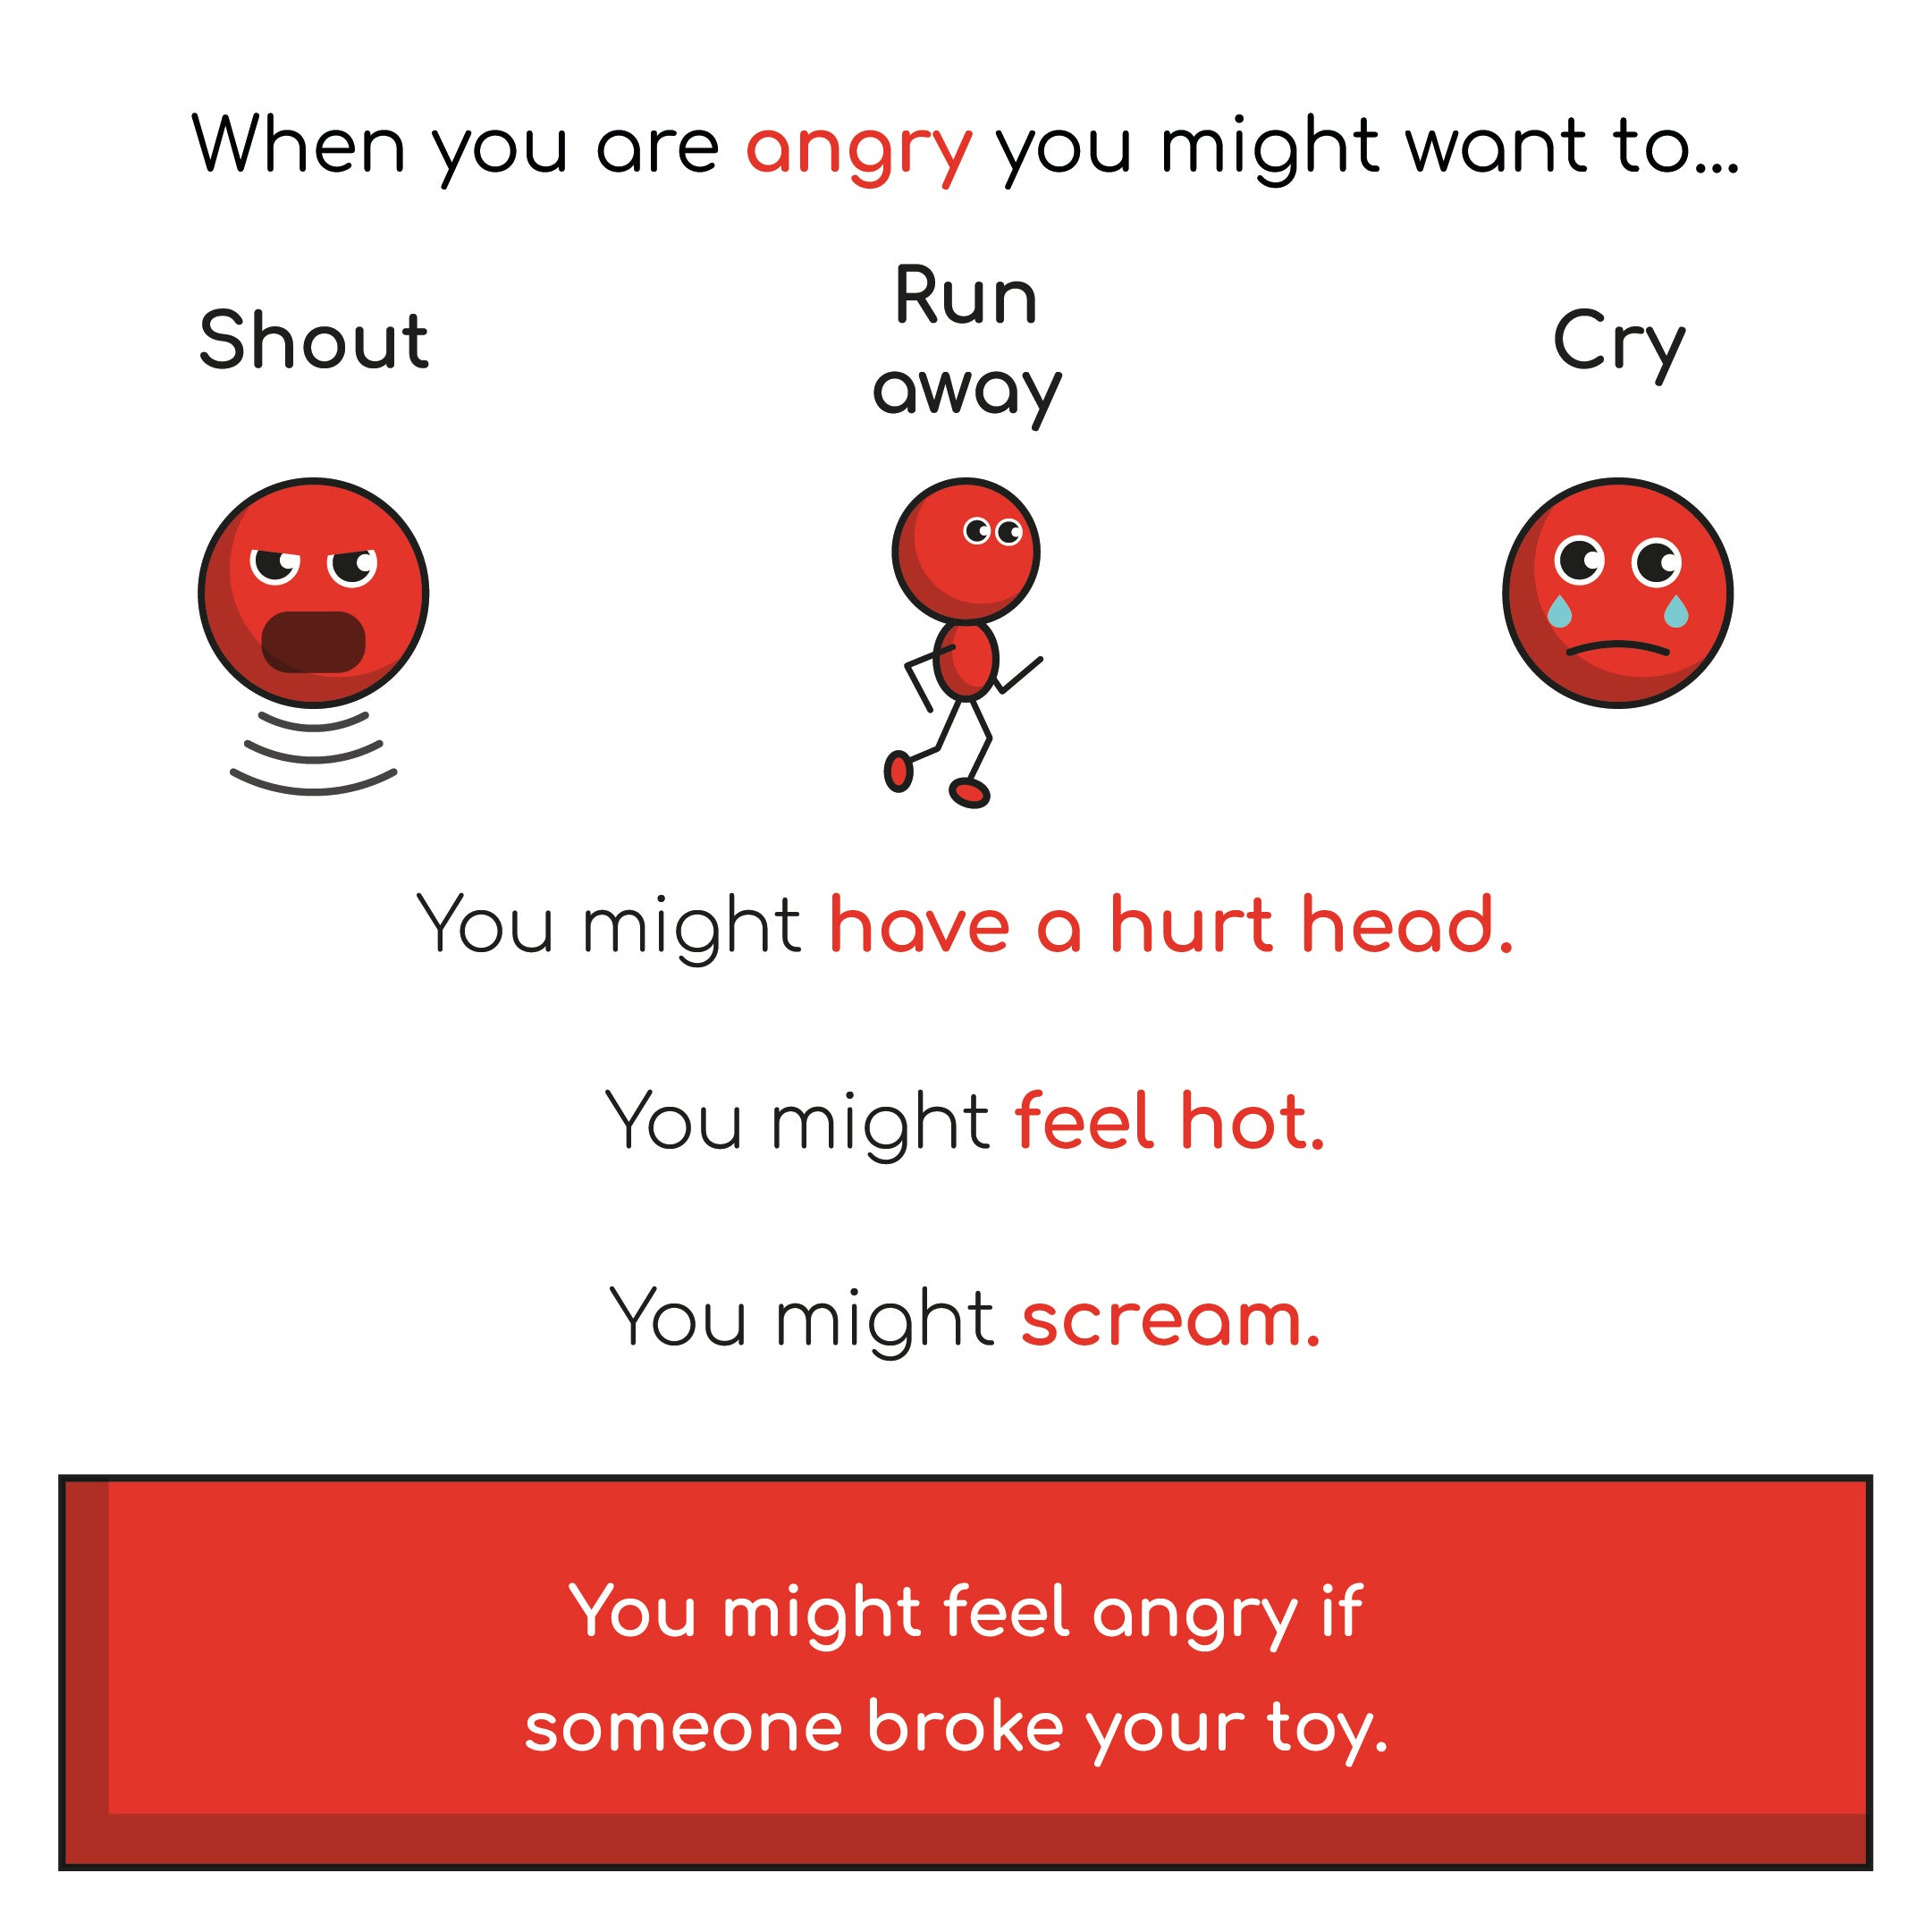 That's Okay Children's Emotions eBook, Video and Audio Openwoodgate Digital Version